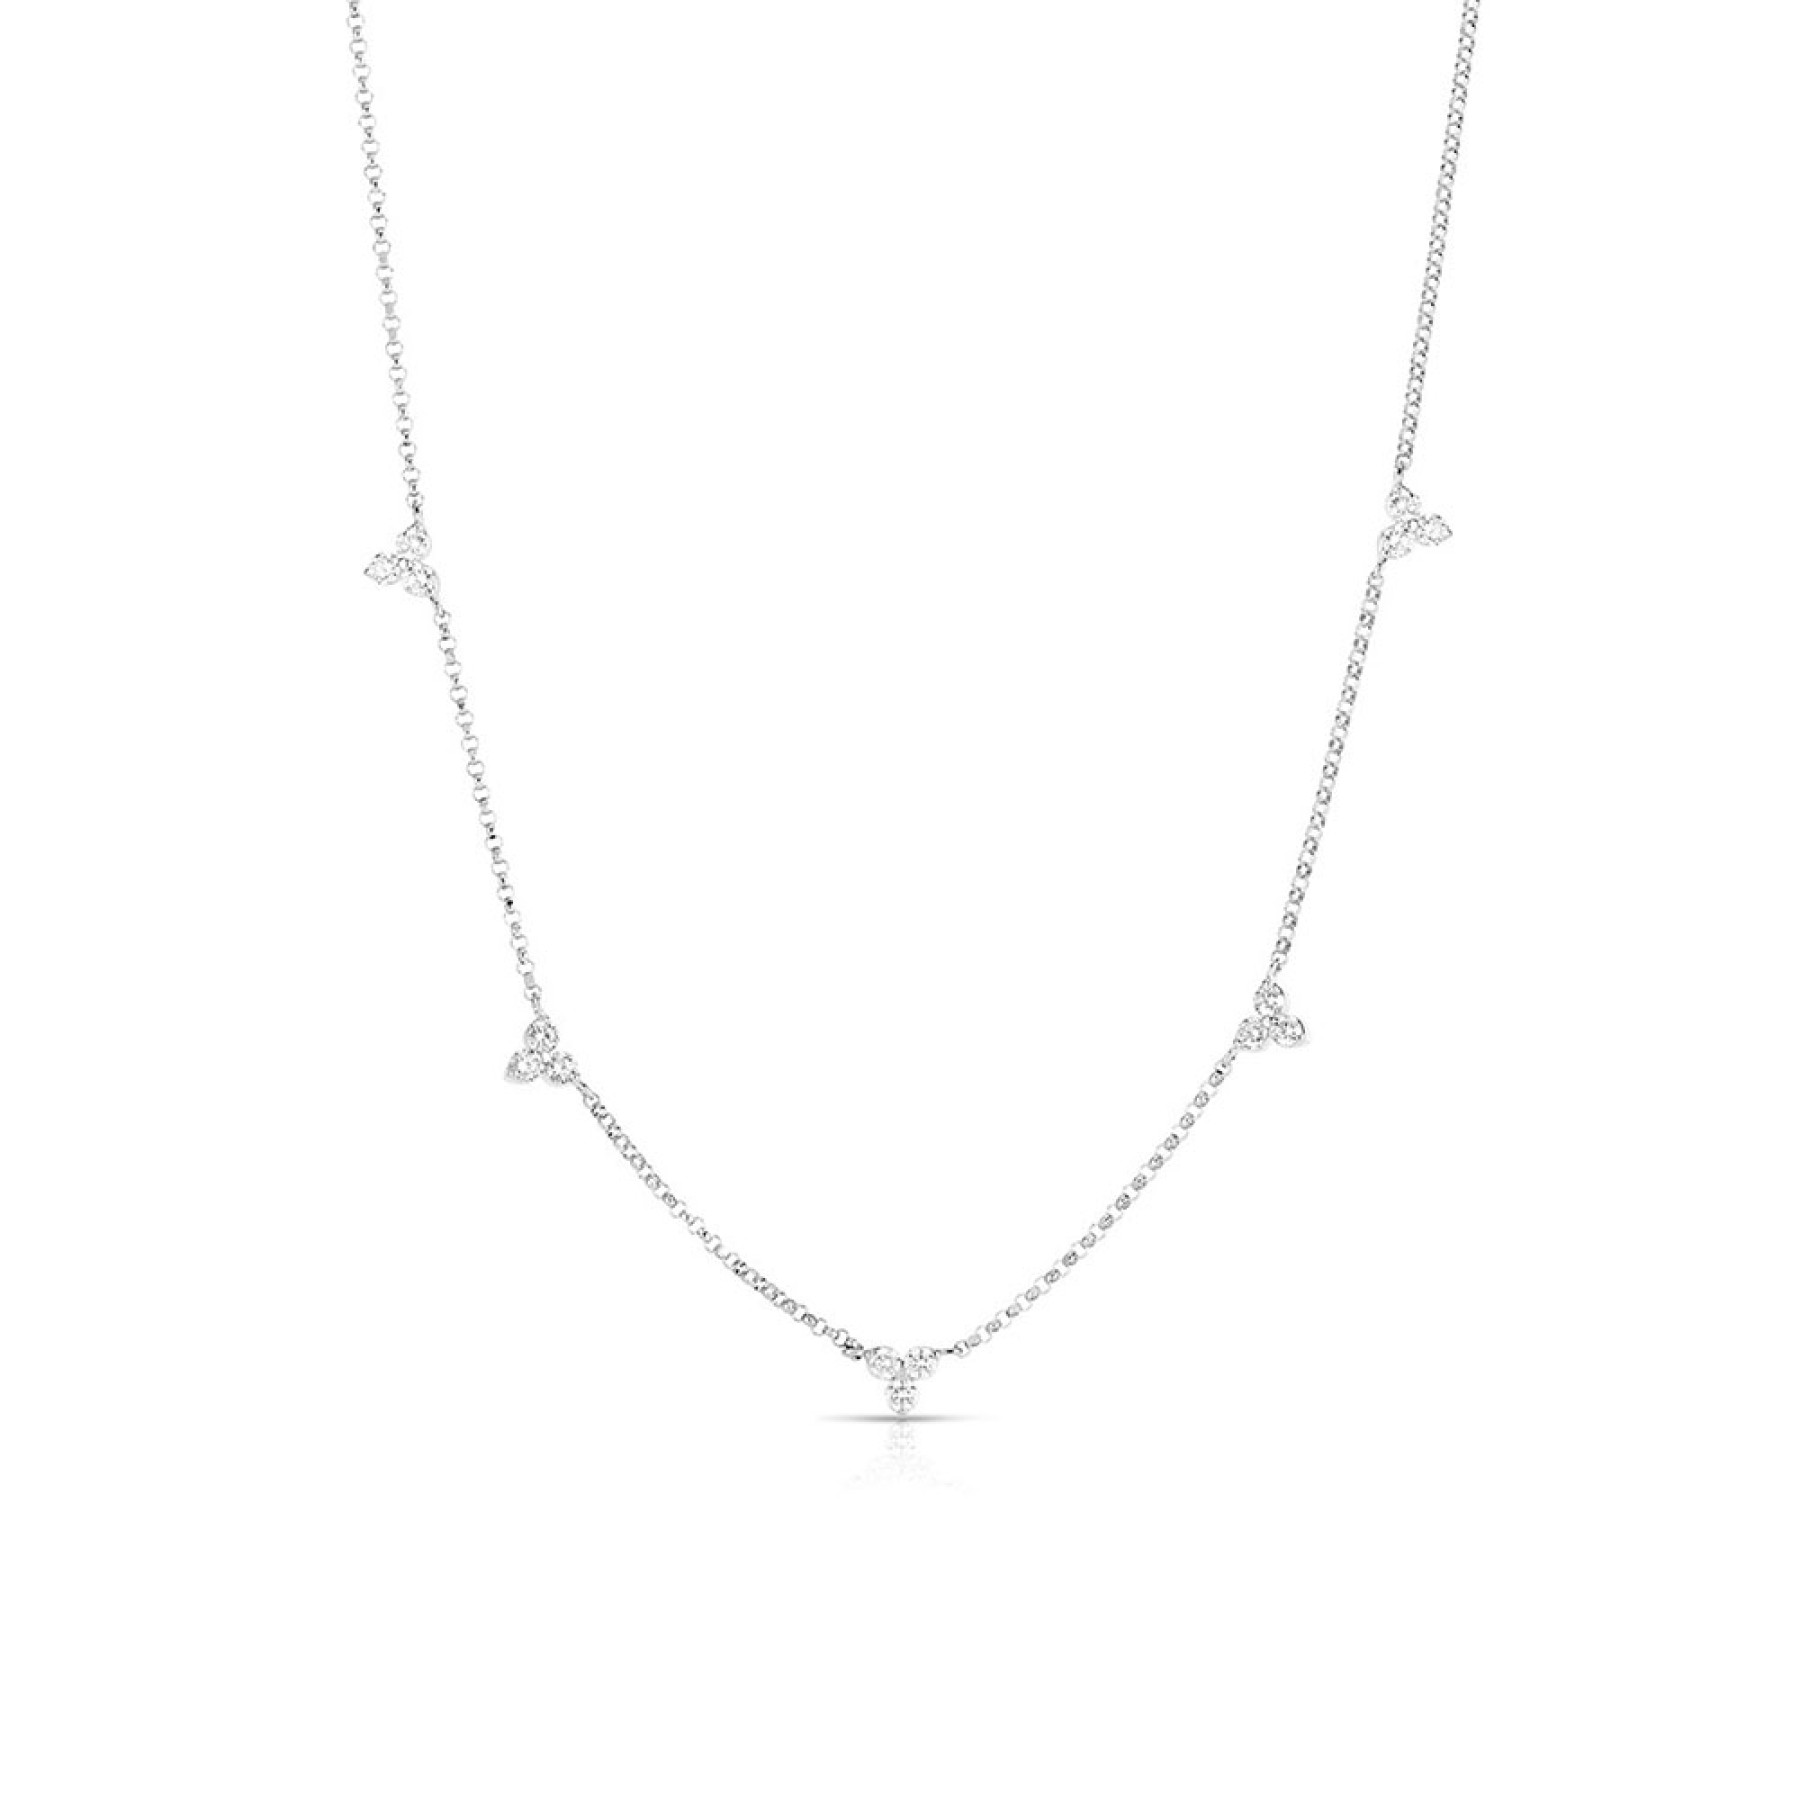 Roberto Coin Diamonds By The Inch 5 Station Diamond Necklace in White Gold  - 0.45ctw